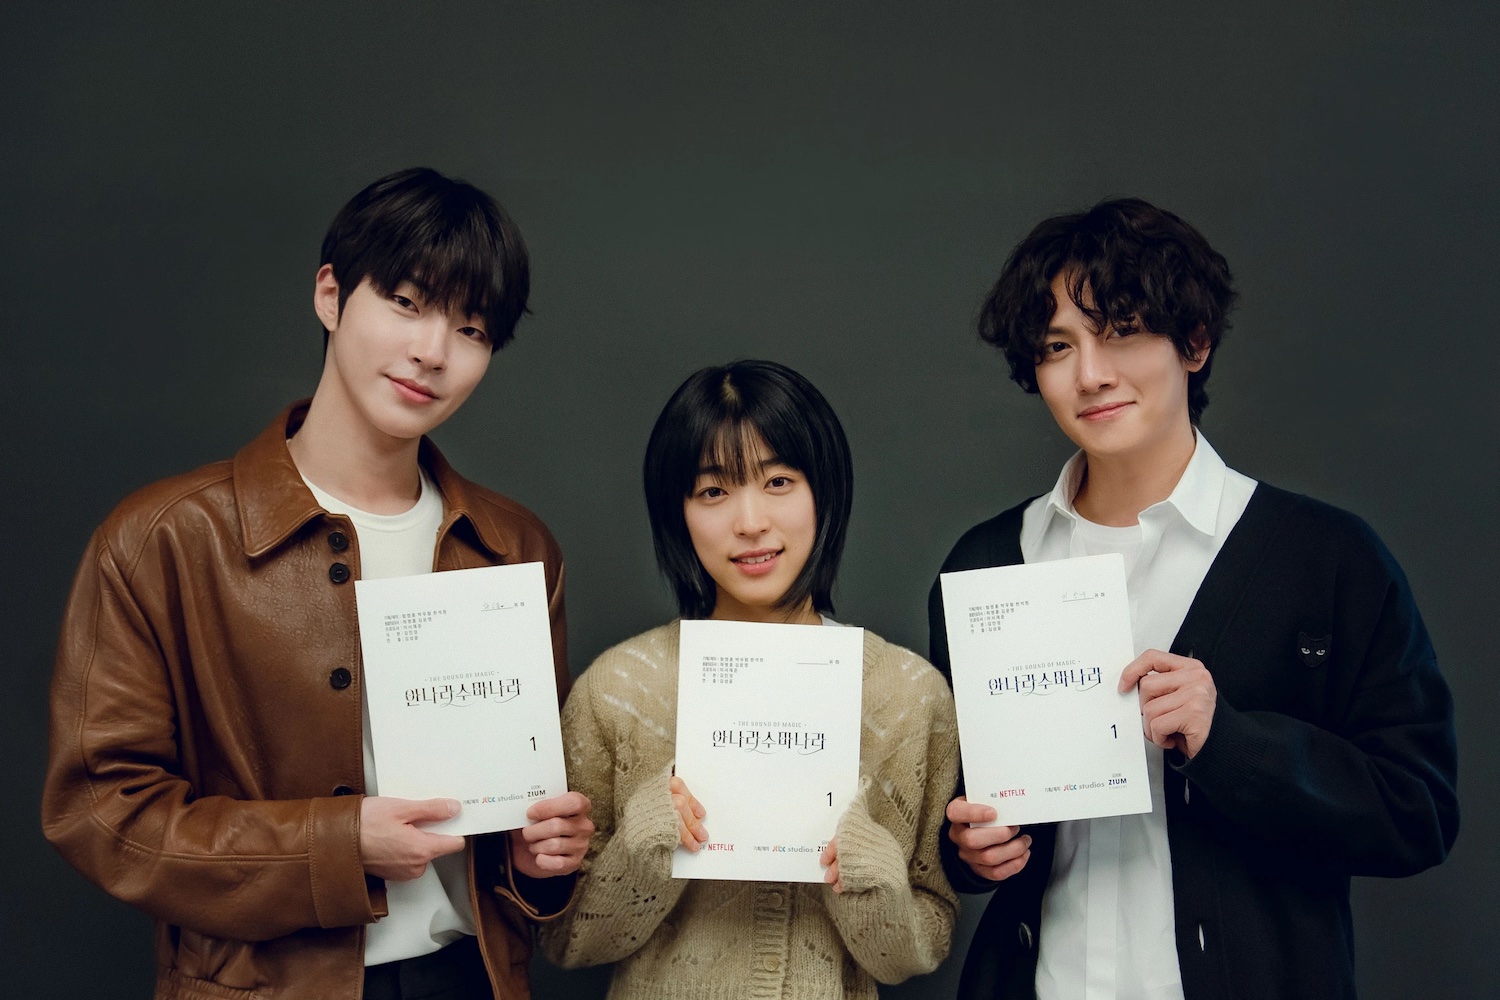 Hwang In-Youp, Choi Sung-Eun, and Ji Chang-Wook pose for the camera with their scripts for the Webtoon adaptation of "Annarasumanara"